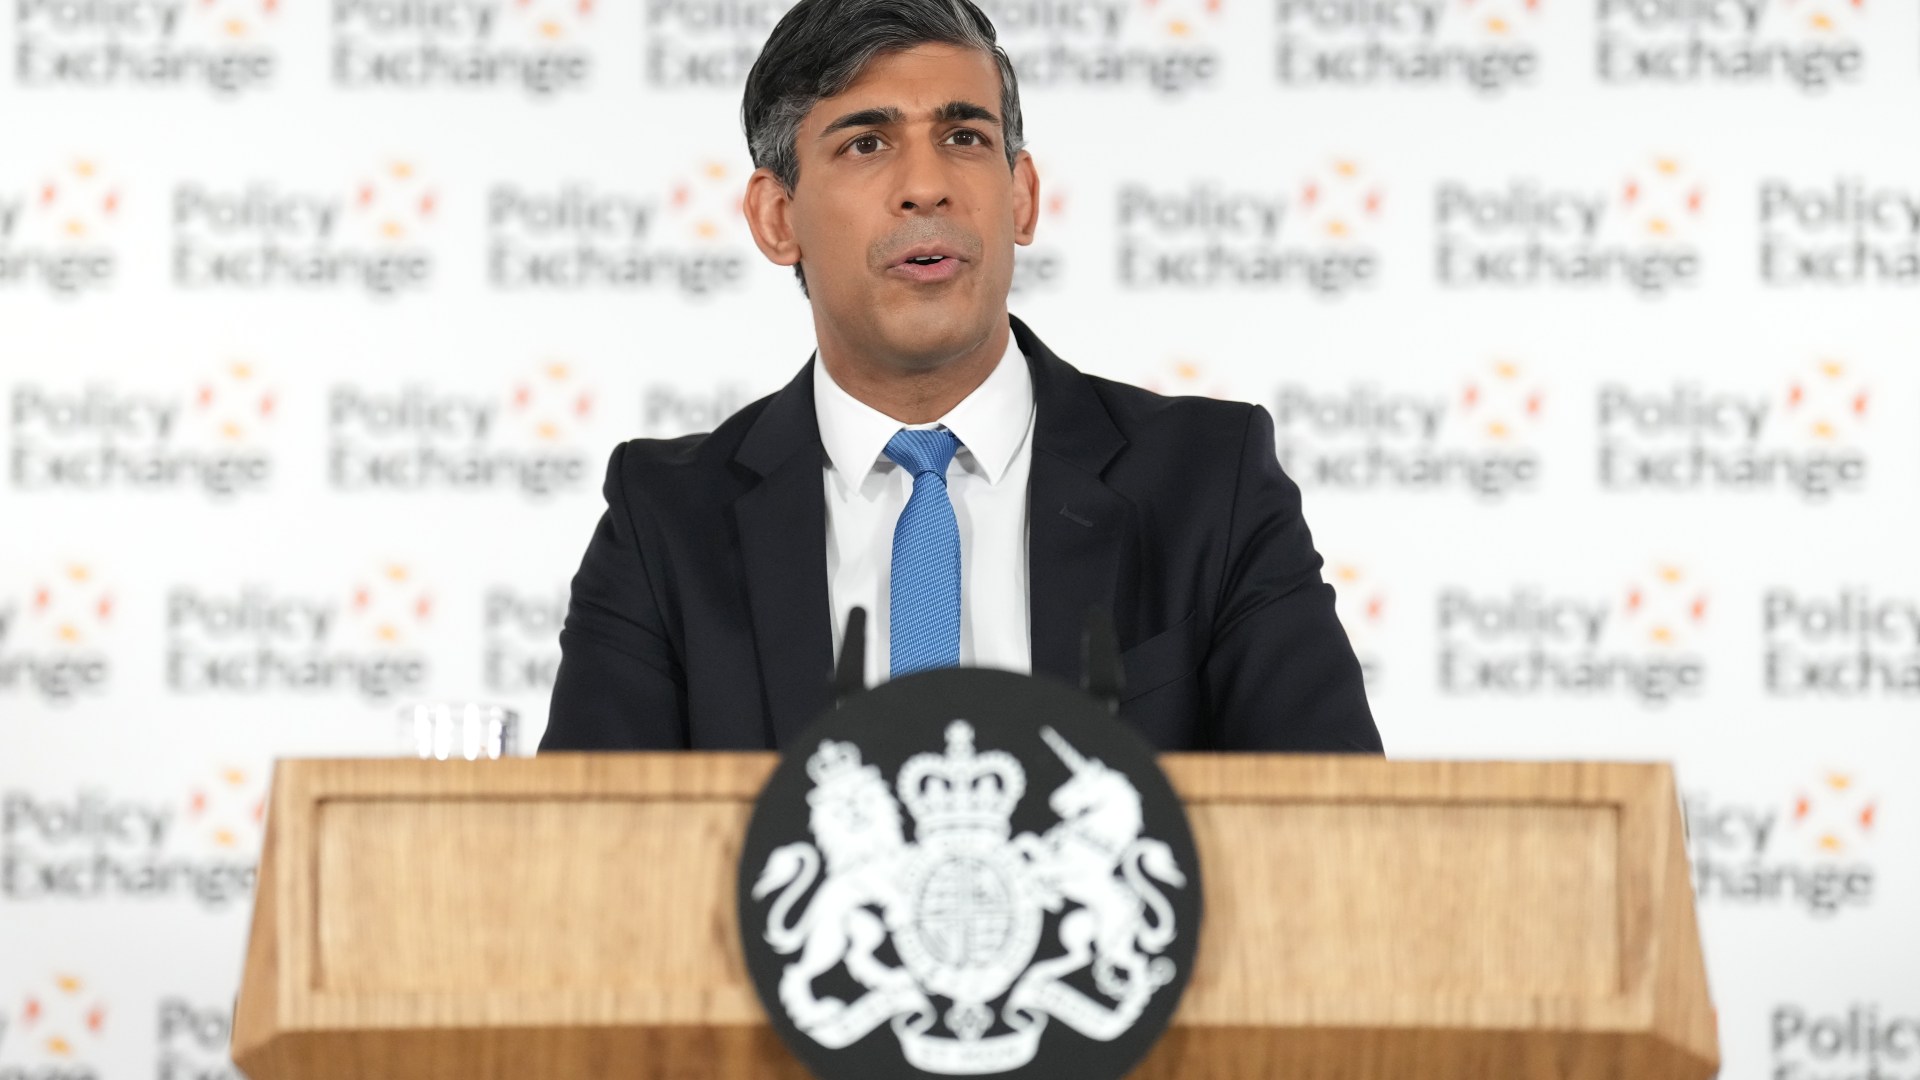 I WILL win election, vows defiant Rishi as he takes swipe at Starmer for cosying up to Corbyn and defector Elphicke [Video]